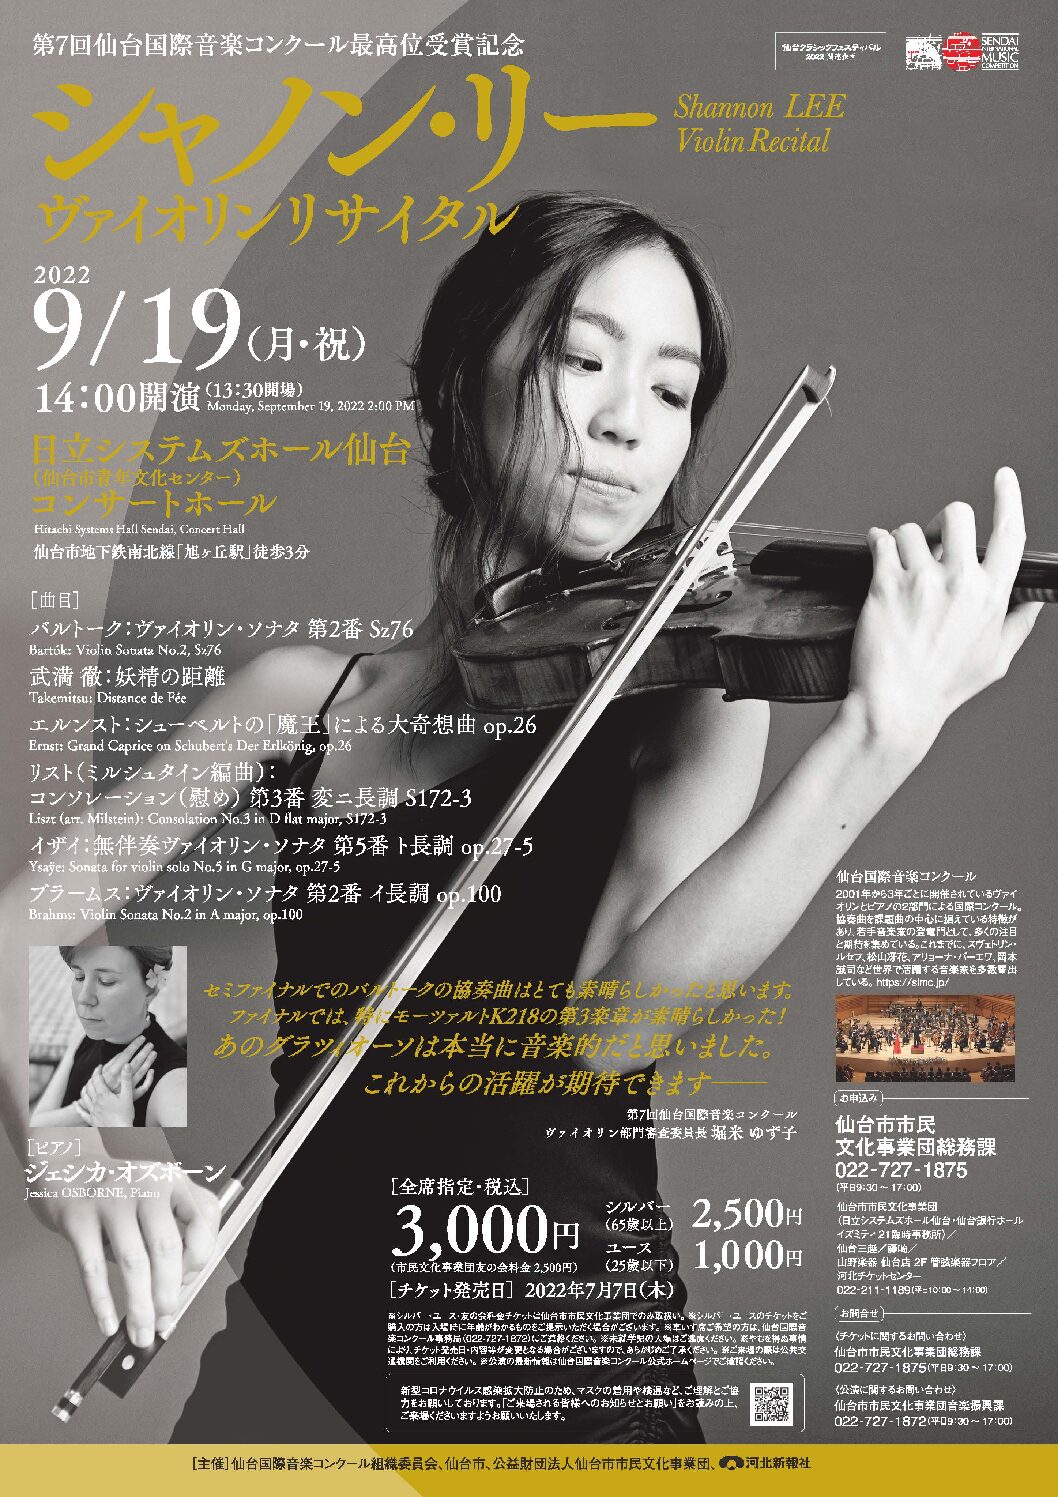 The 7th SIMC Highest Ranked Prizewinners’ Recital Shannon LEE Violin ...